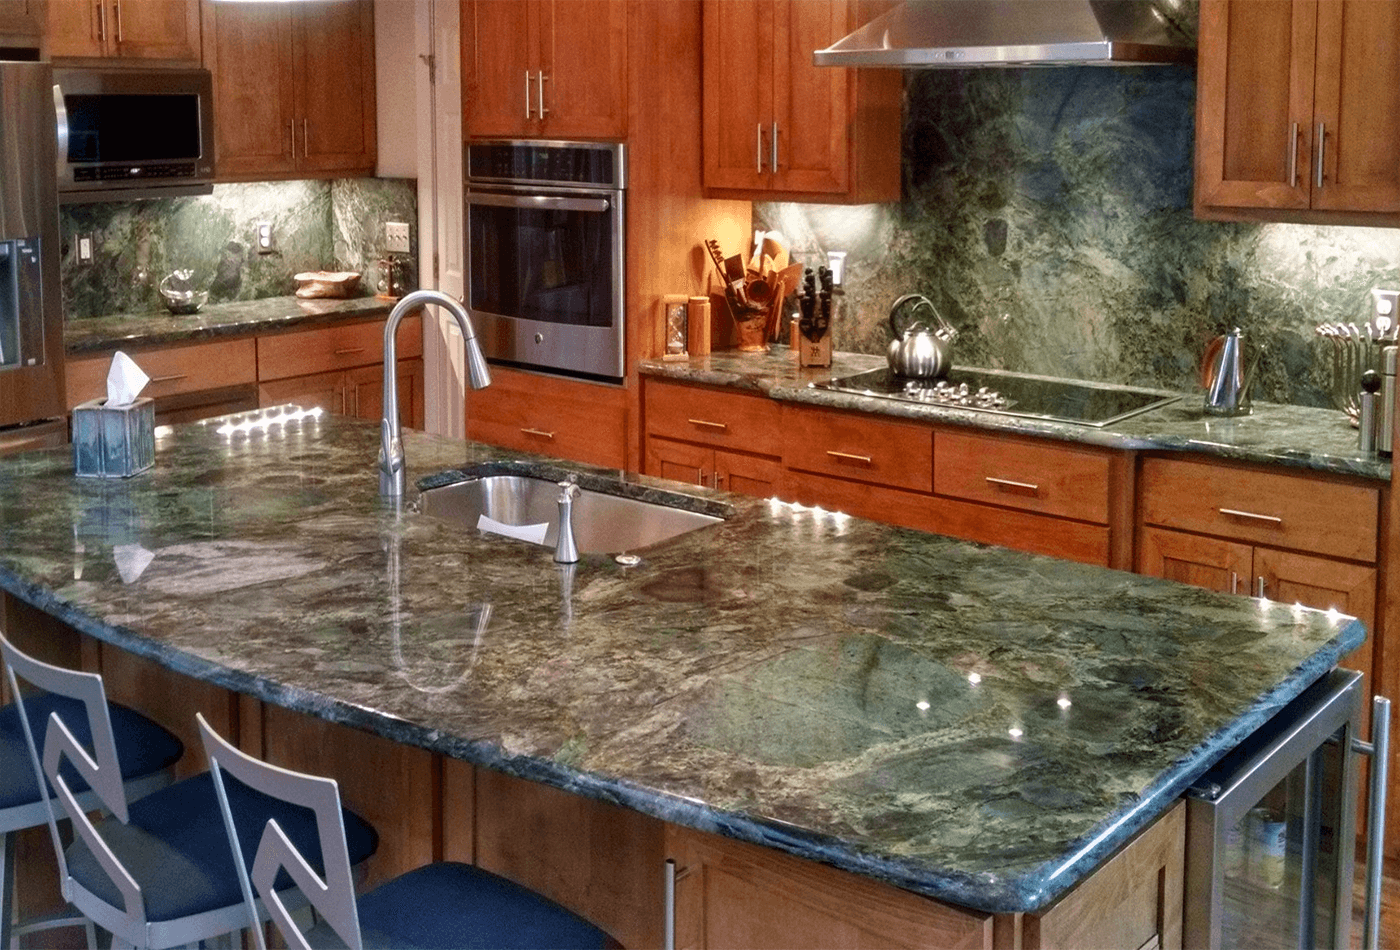 Greenish Granite; Bring Out the Nature into Your Kitchen– www.work ...